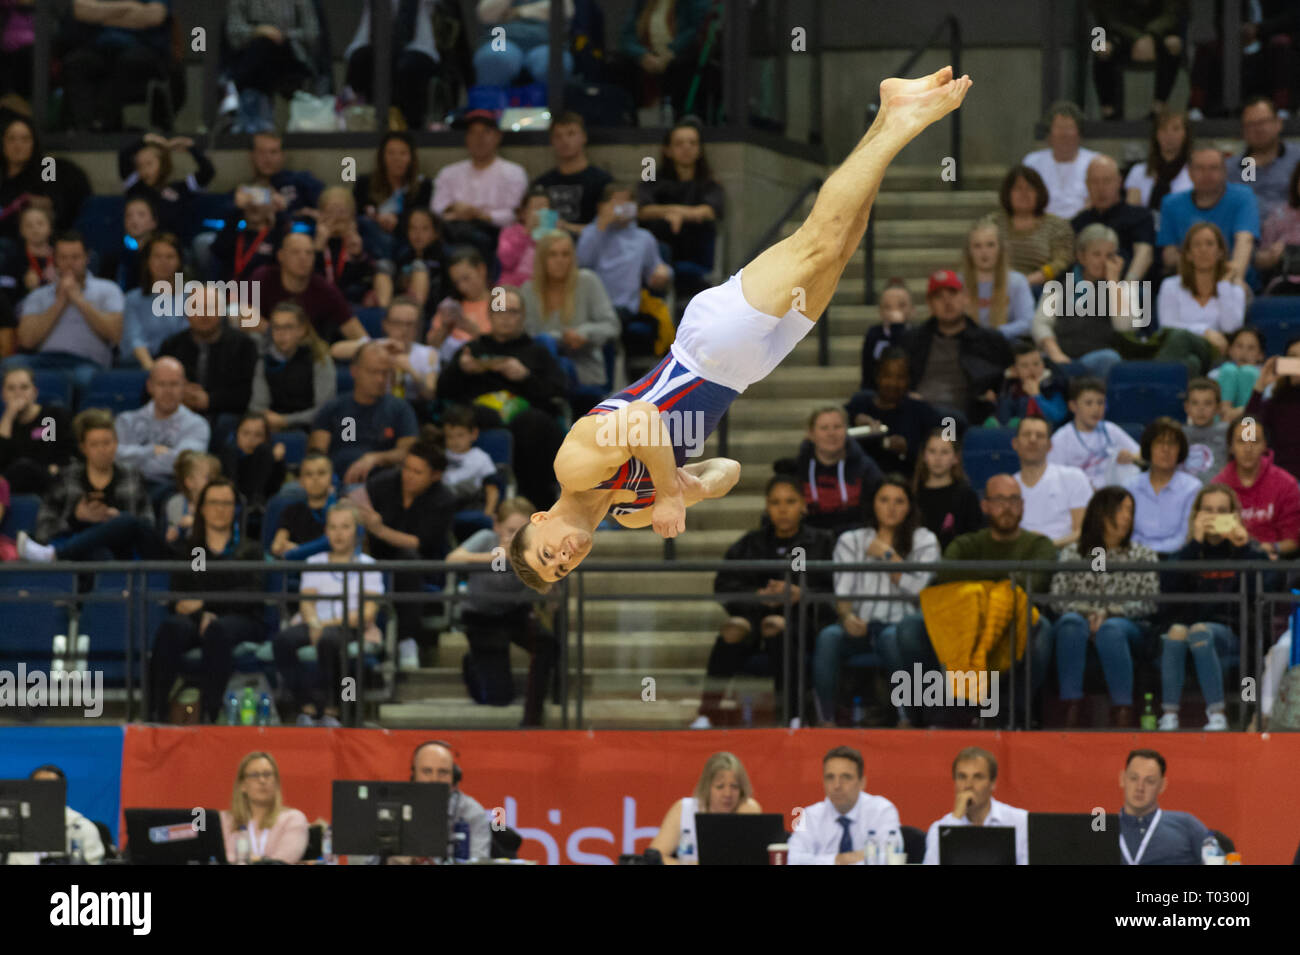 Liverpool, UK. 17th March 2019. Max Whitlock, MBE of South Essex Gymnastics competing at the Men’s and Women’s Artistic British Championships 2019, M&S Bank Arena, Liverpool, UK. Stock Photo